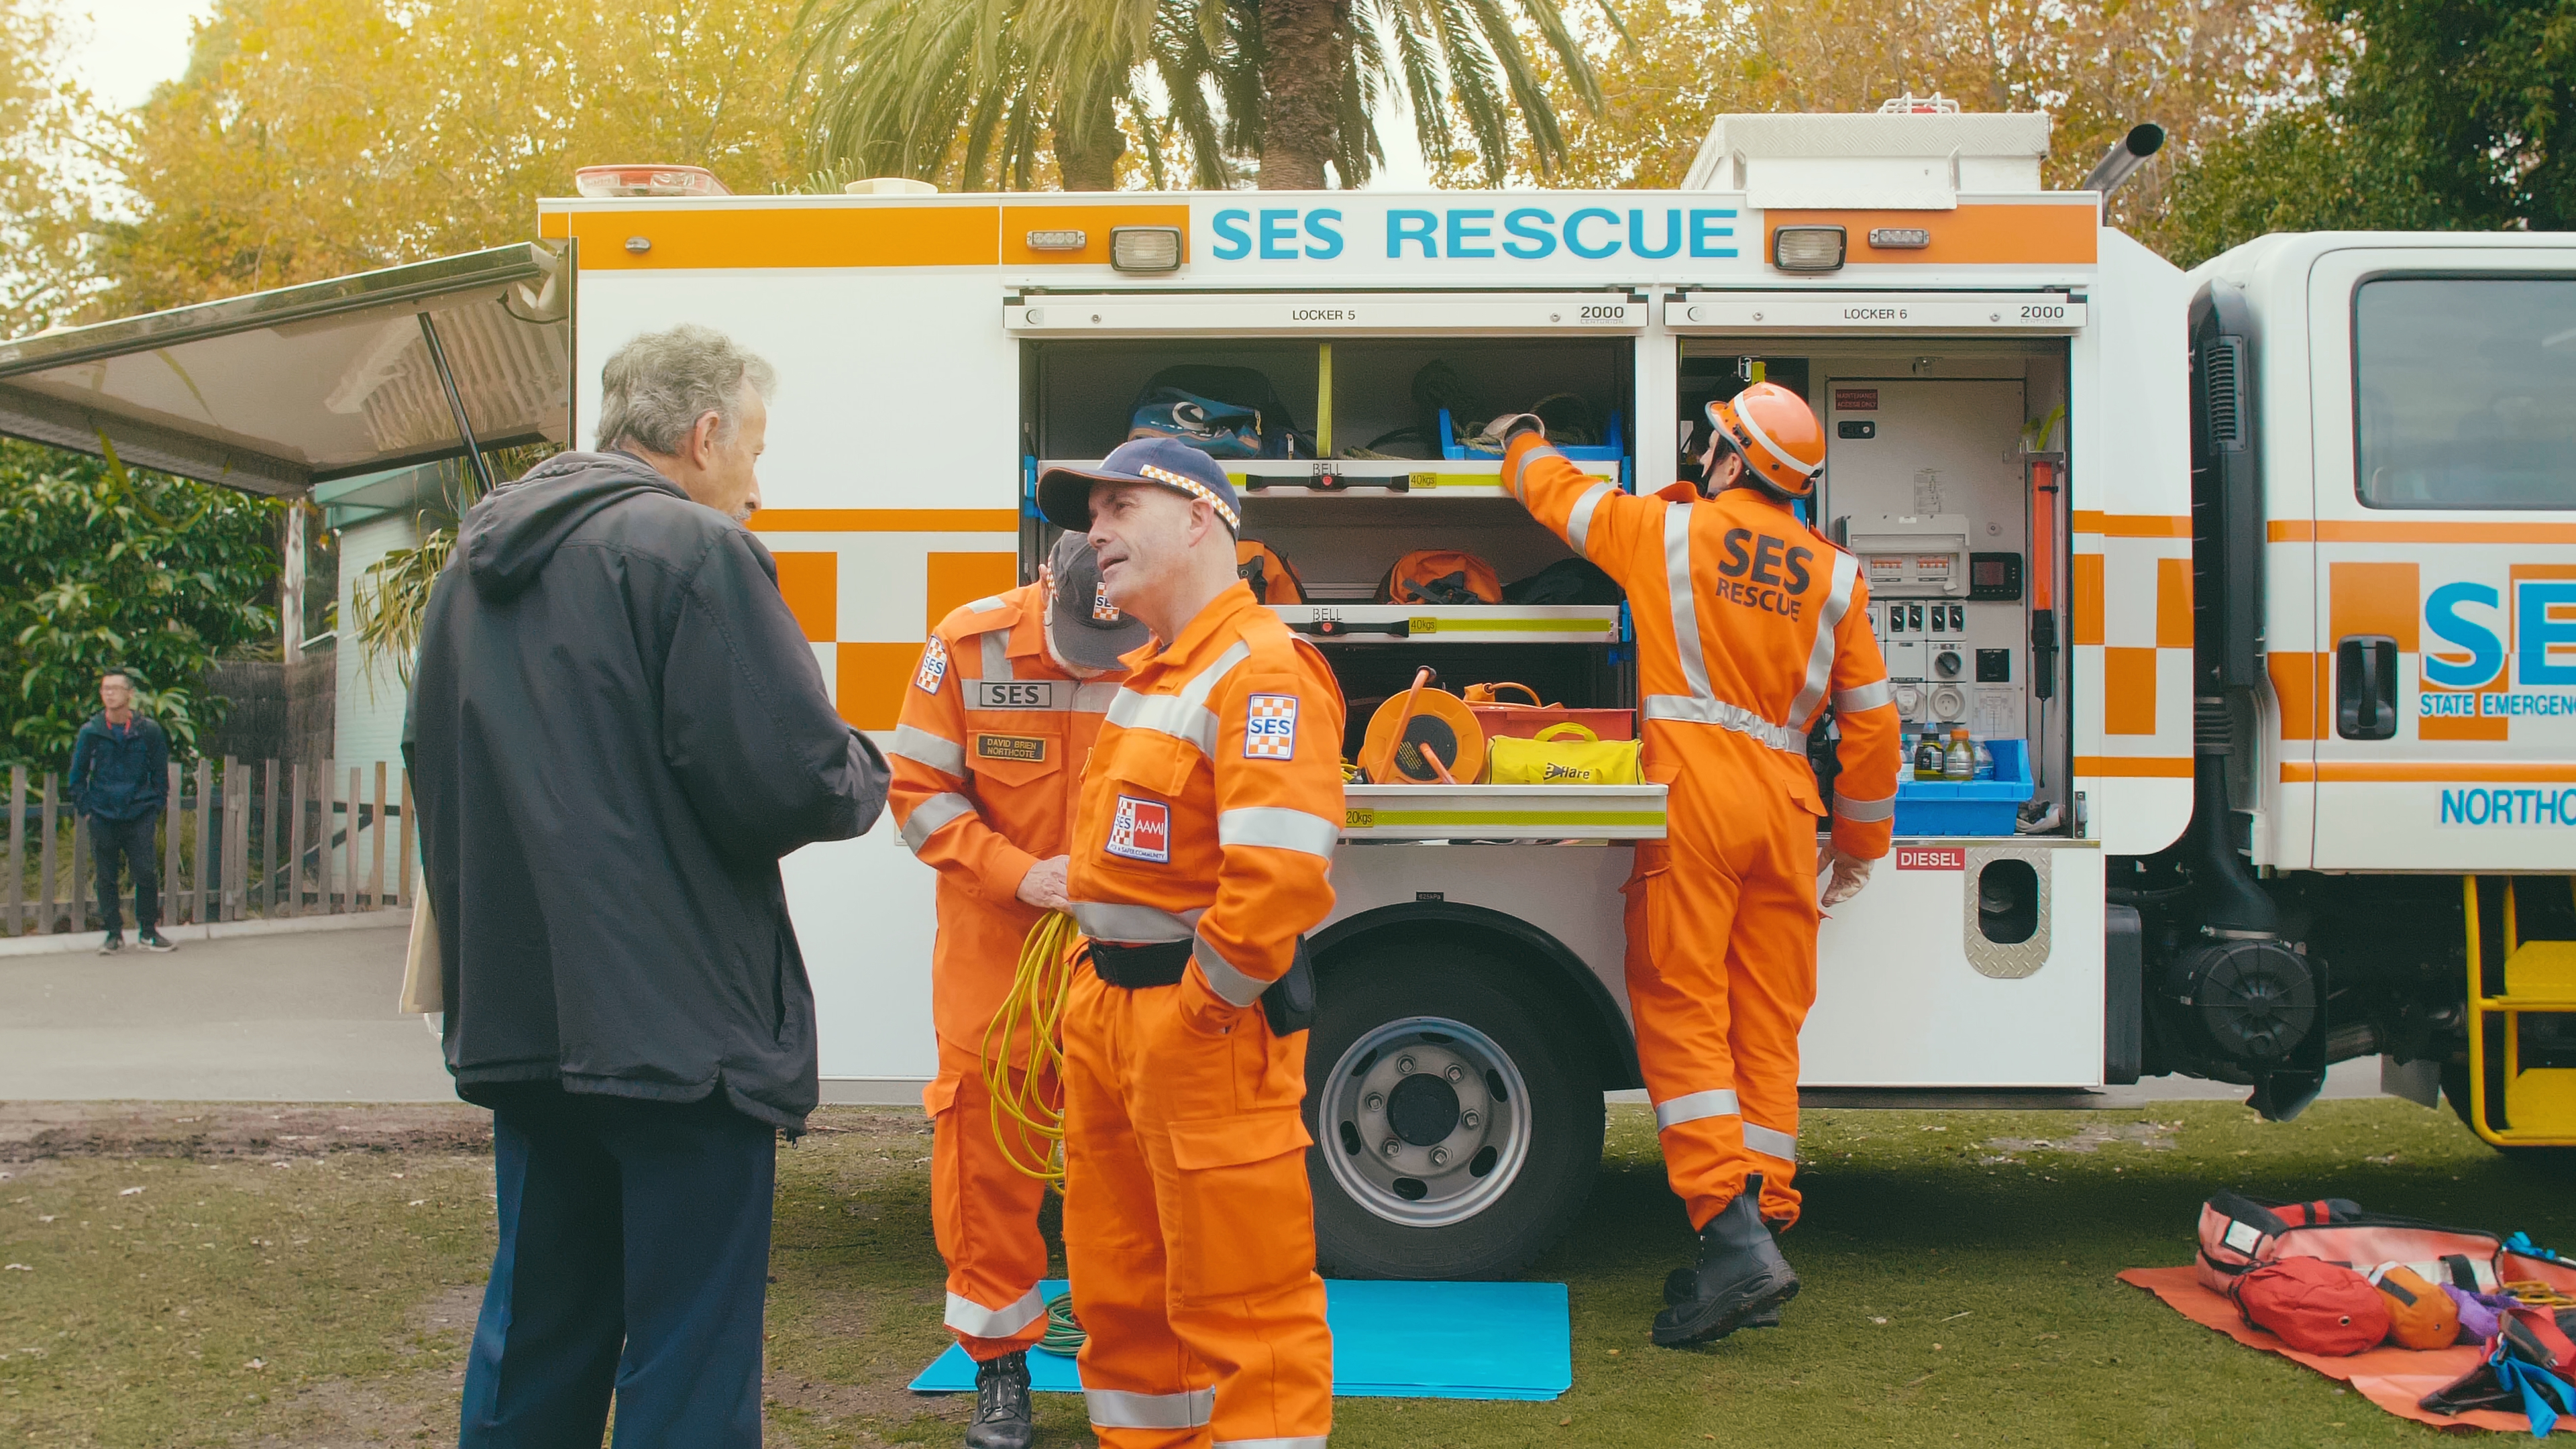 VICSES volunteers chatting with a community member in front of a VICSES vehicle